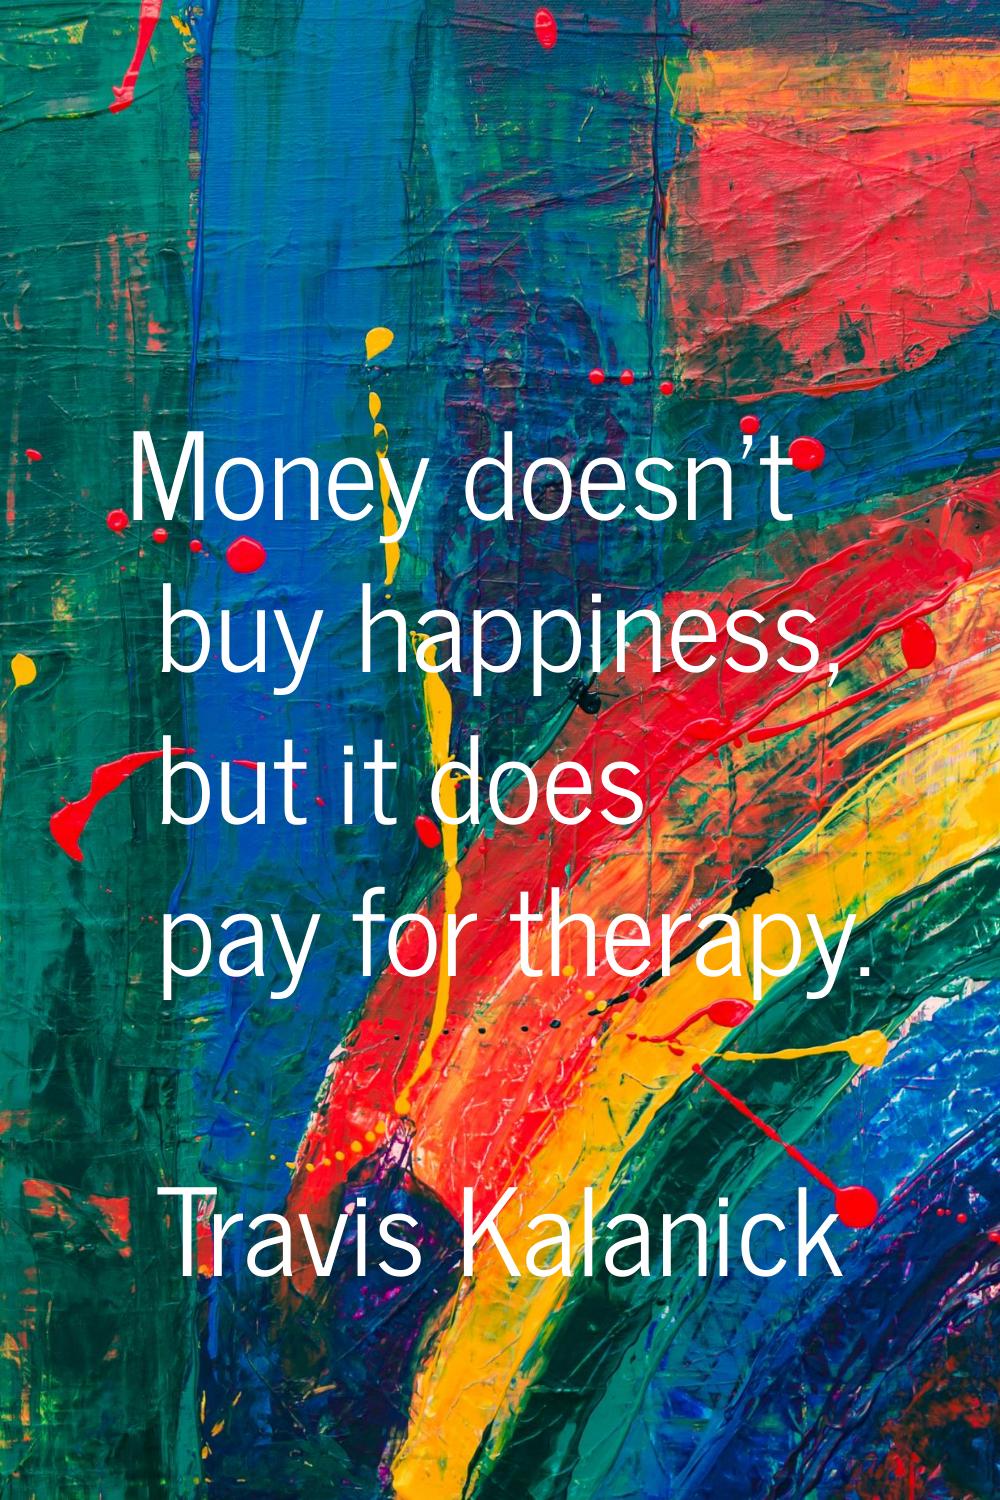 Money doesn't buy happiness, but it does pay for therapy.